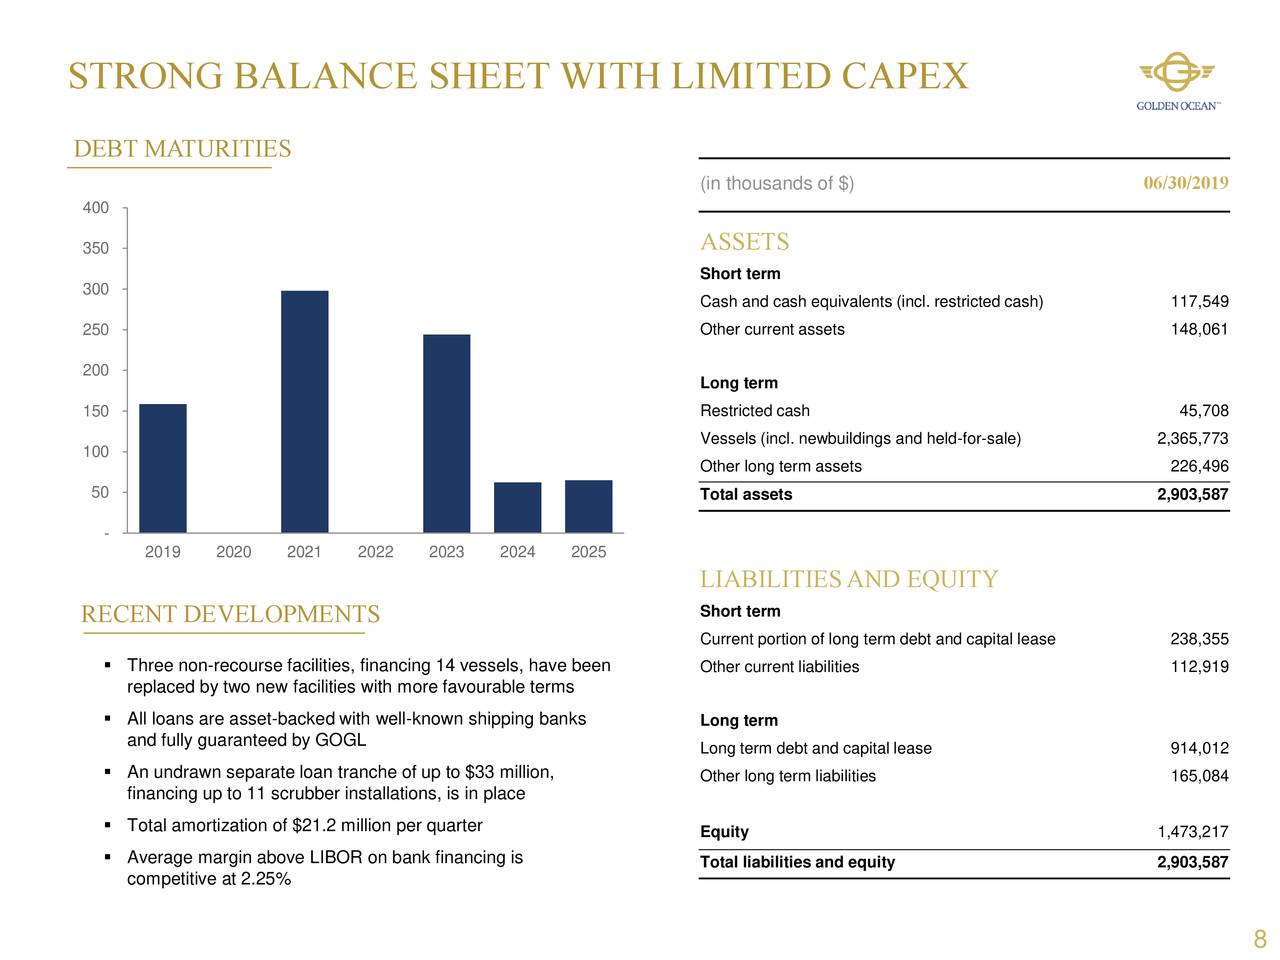 STRONG BALANCE SHEET WITH LIMITED CAPEX